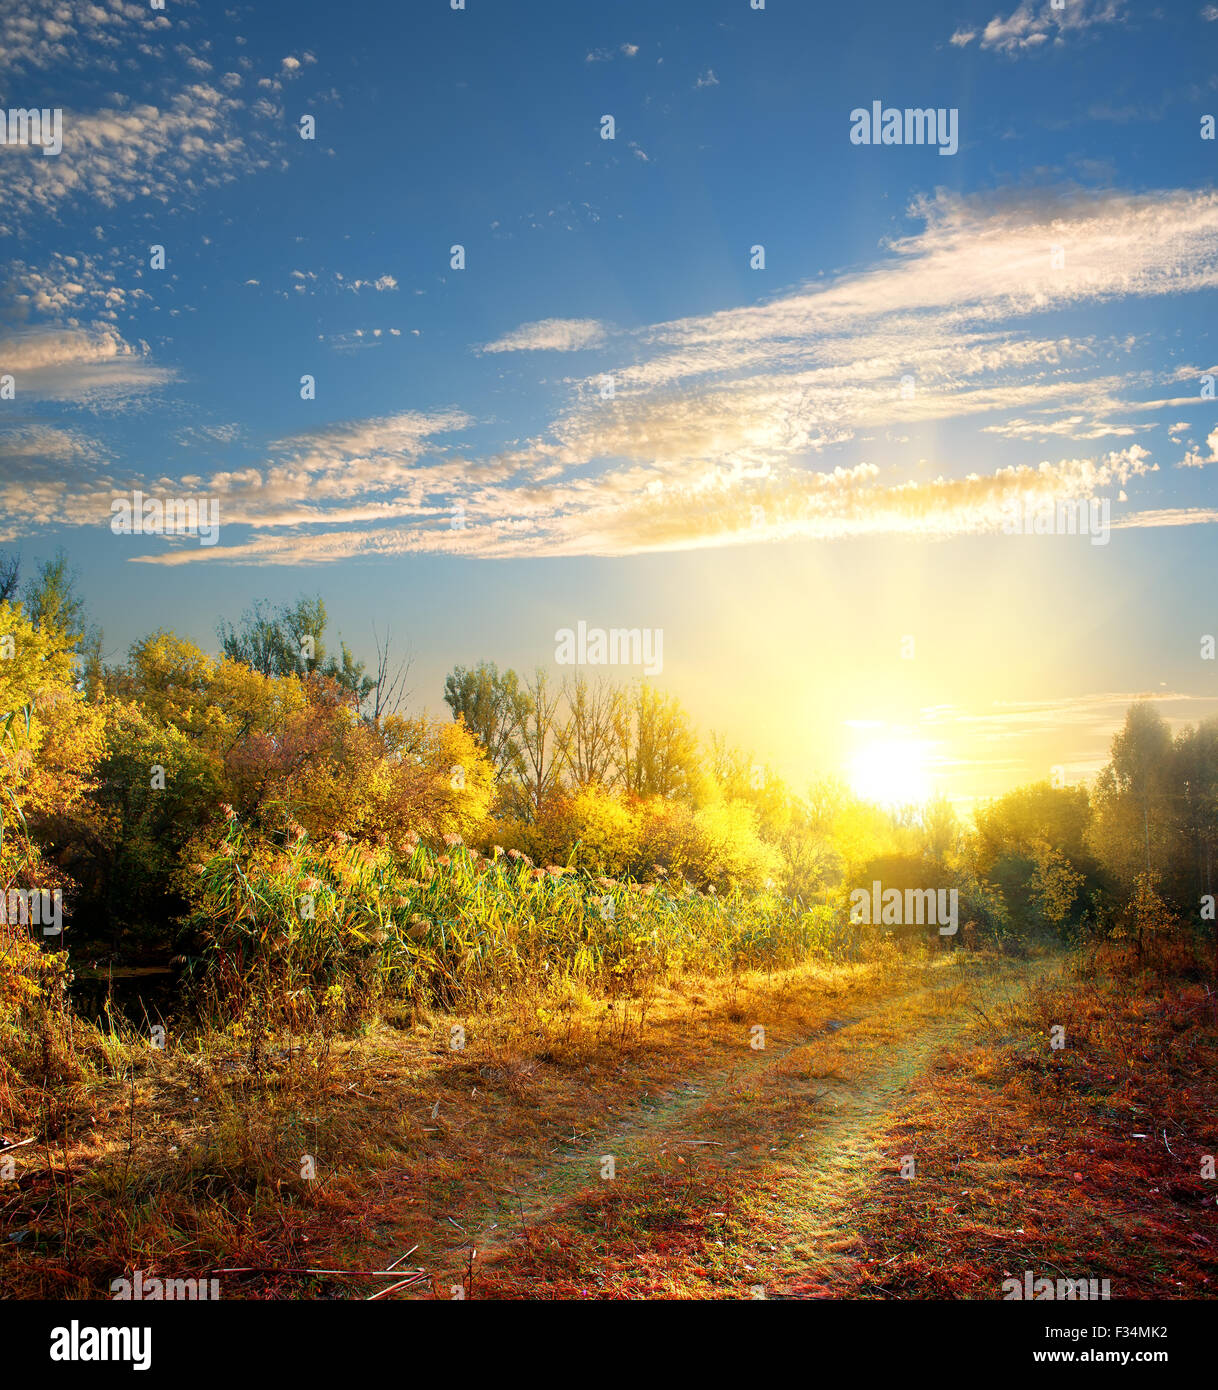 Country road in the colorful autumn forest Stock Photo